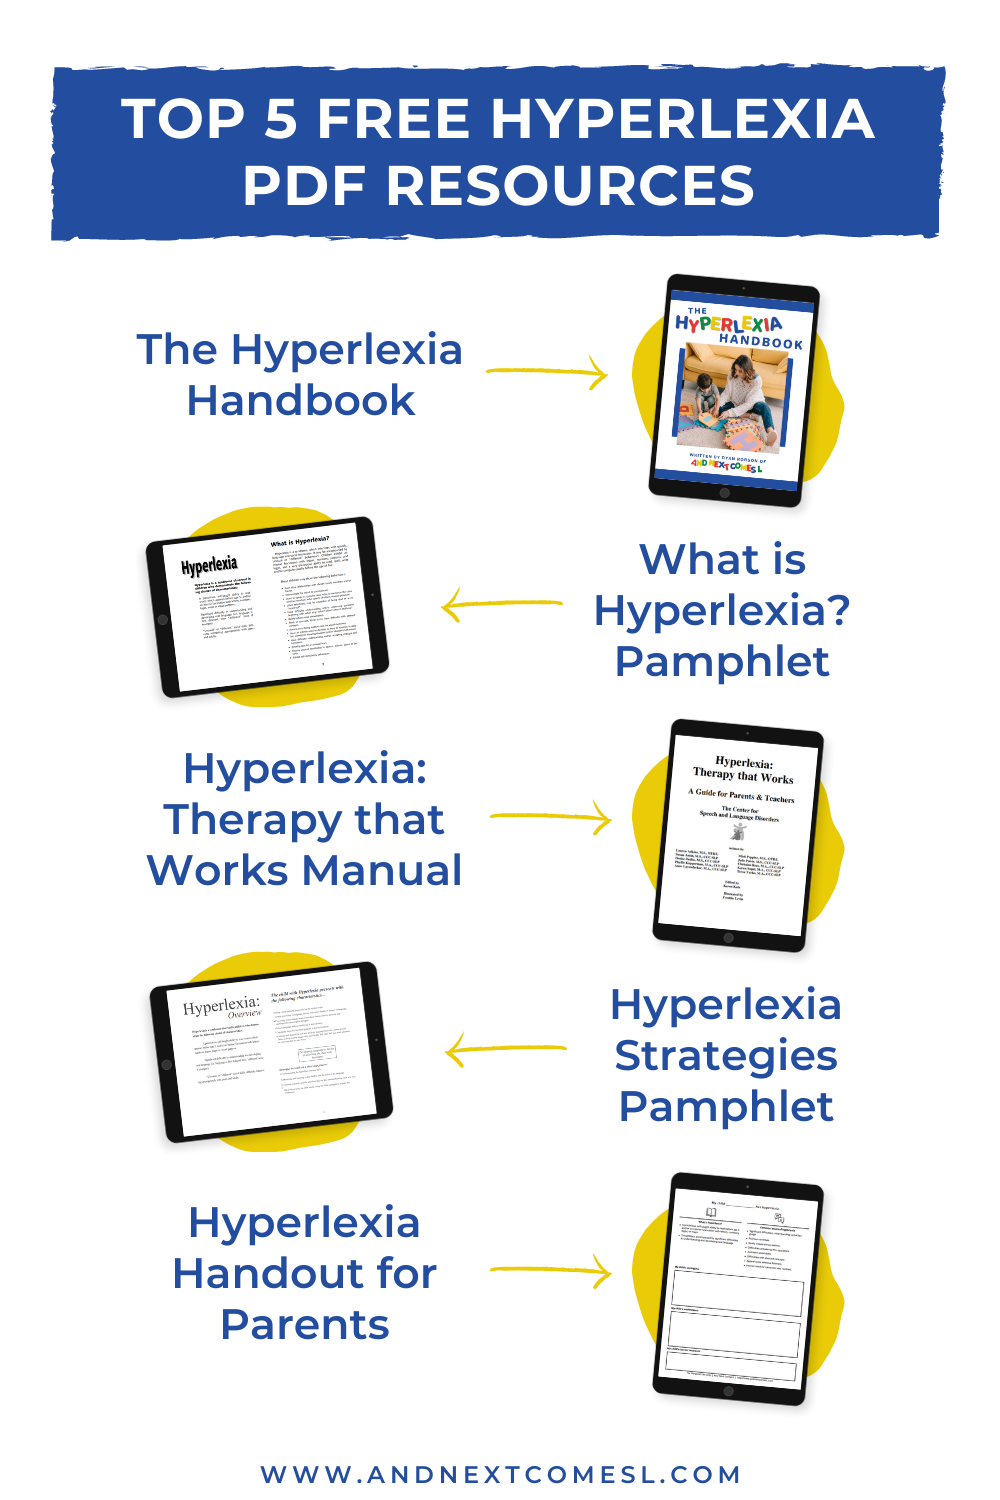 5 free must-have hyperlexia PDF resources for parents and teachers